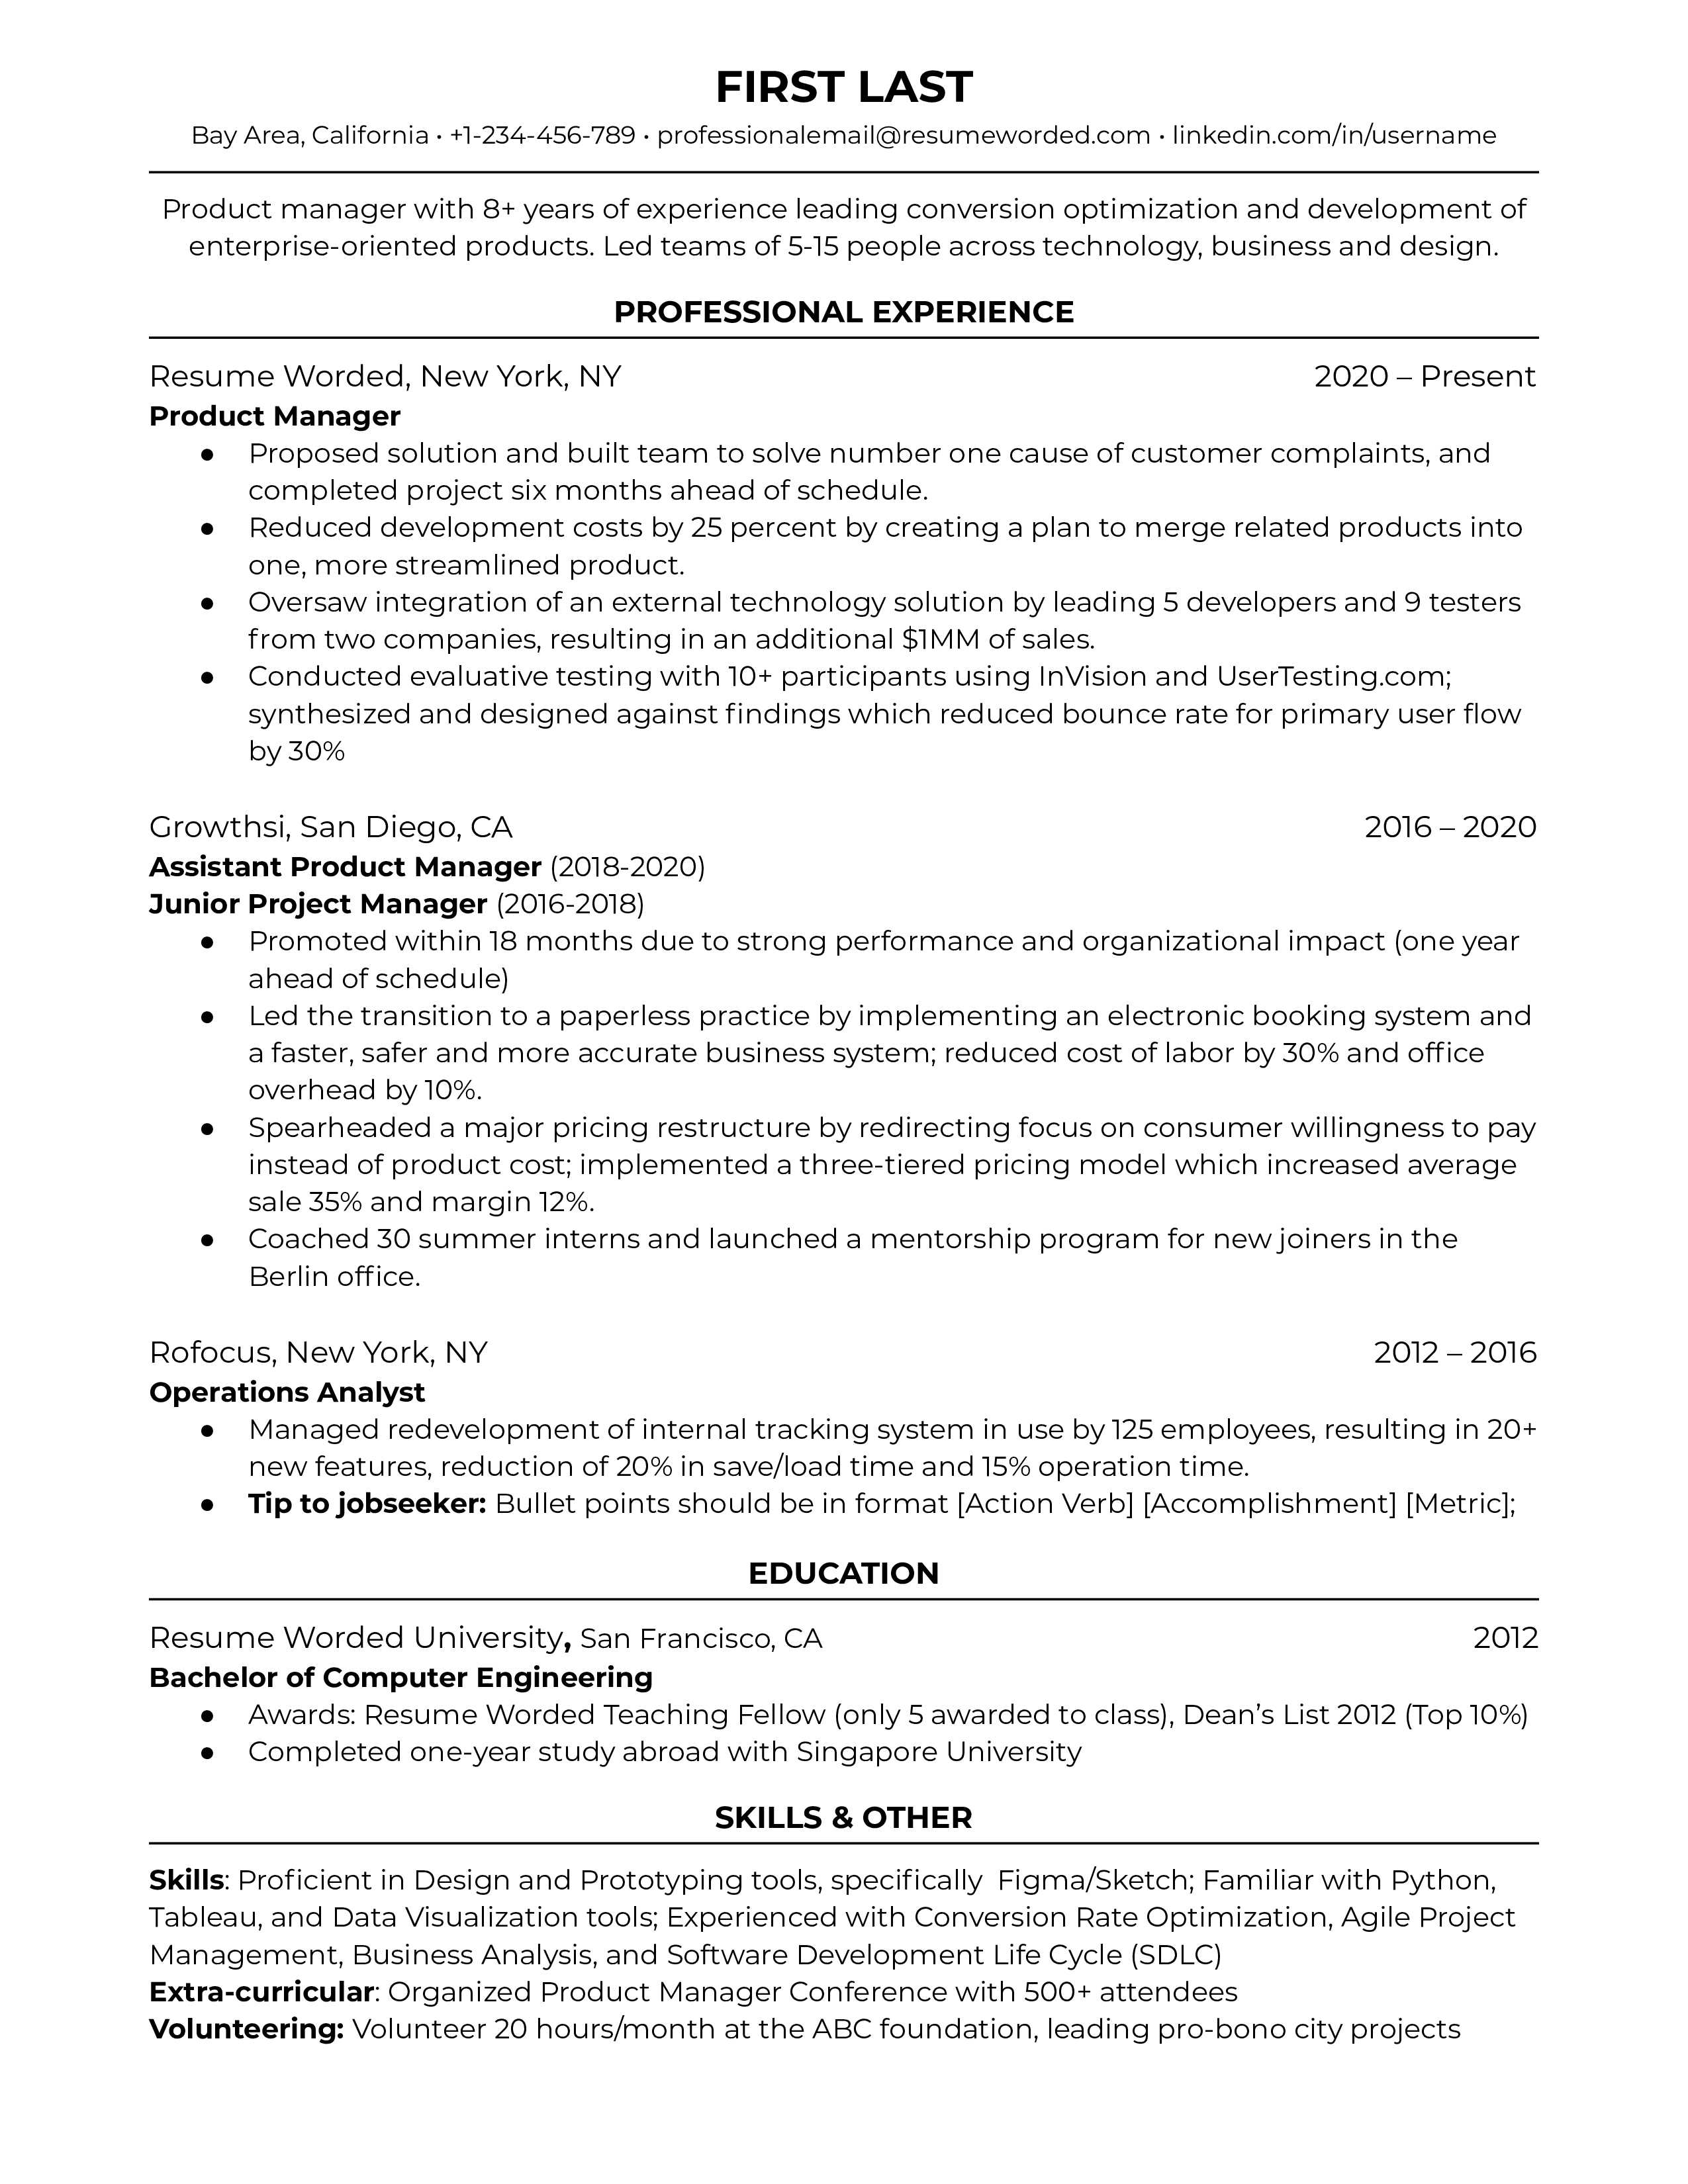 Product Manager Resume Sample